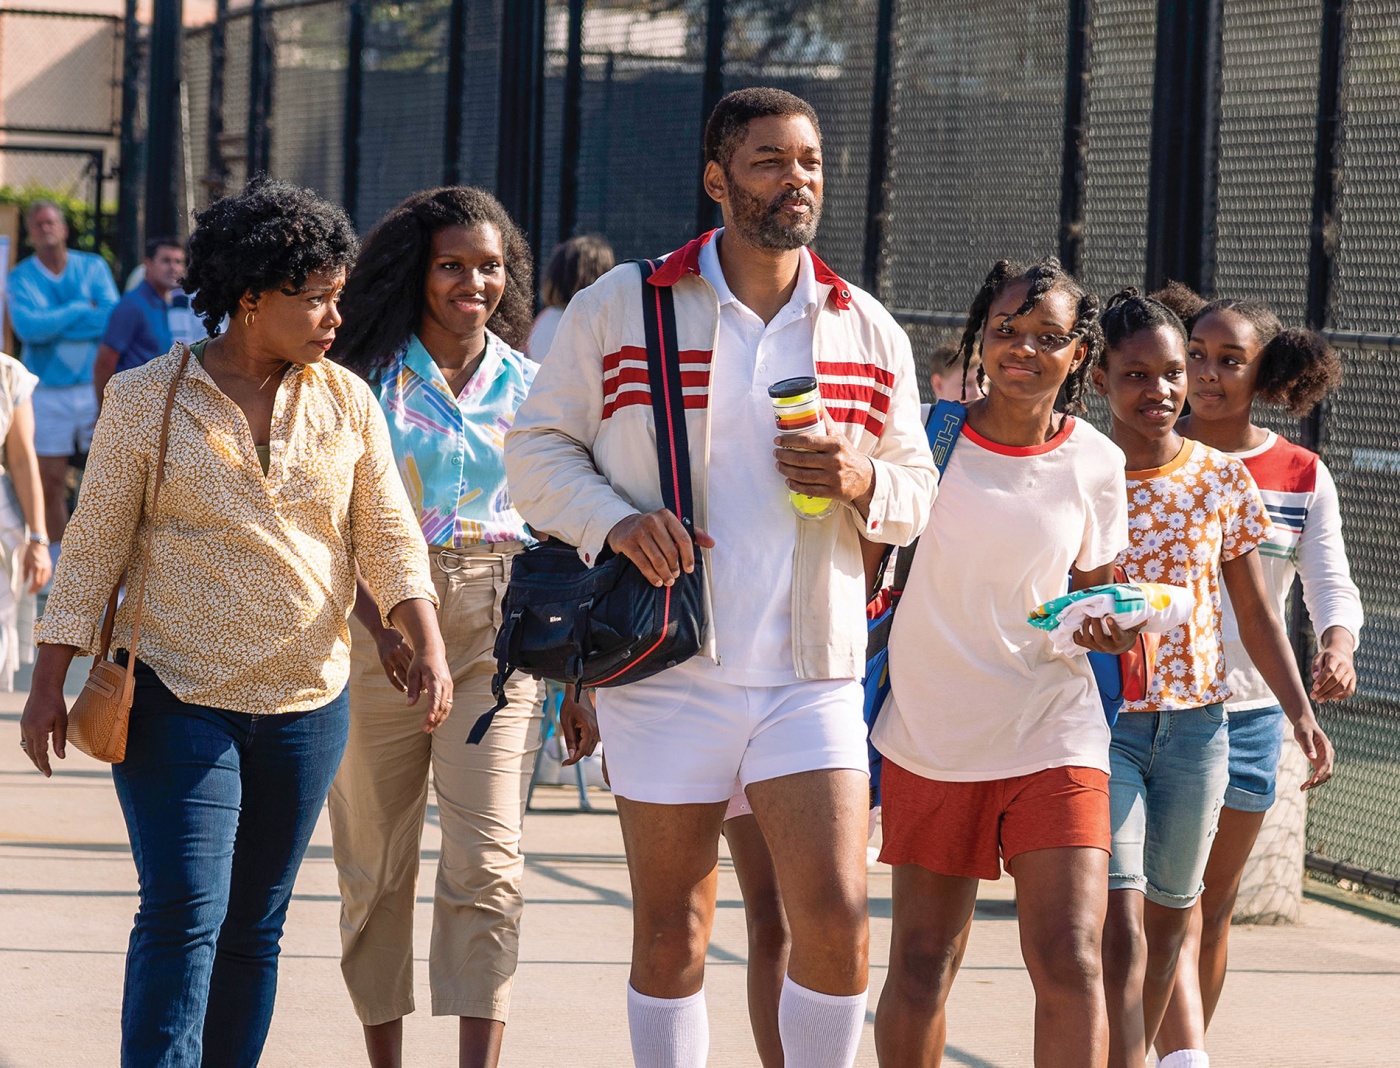 Image of still from King Richard of Will Smith and Aunjanue Ellis